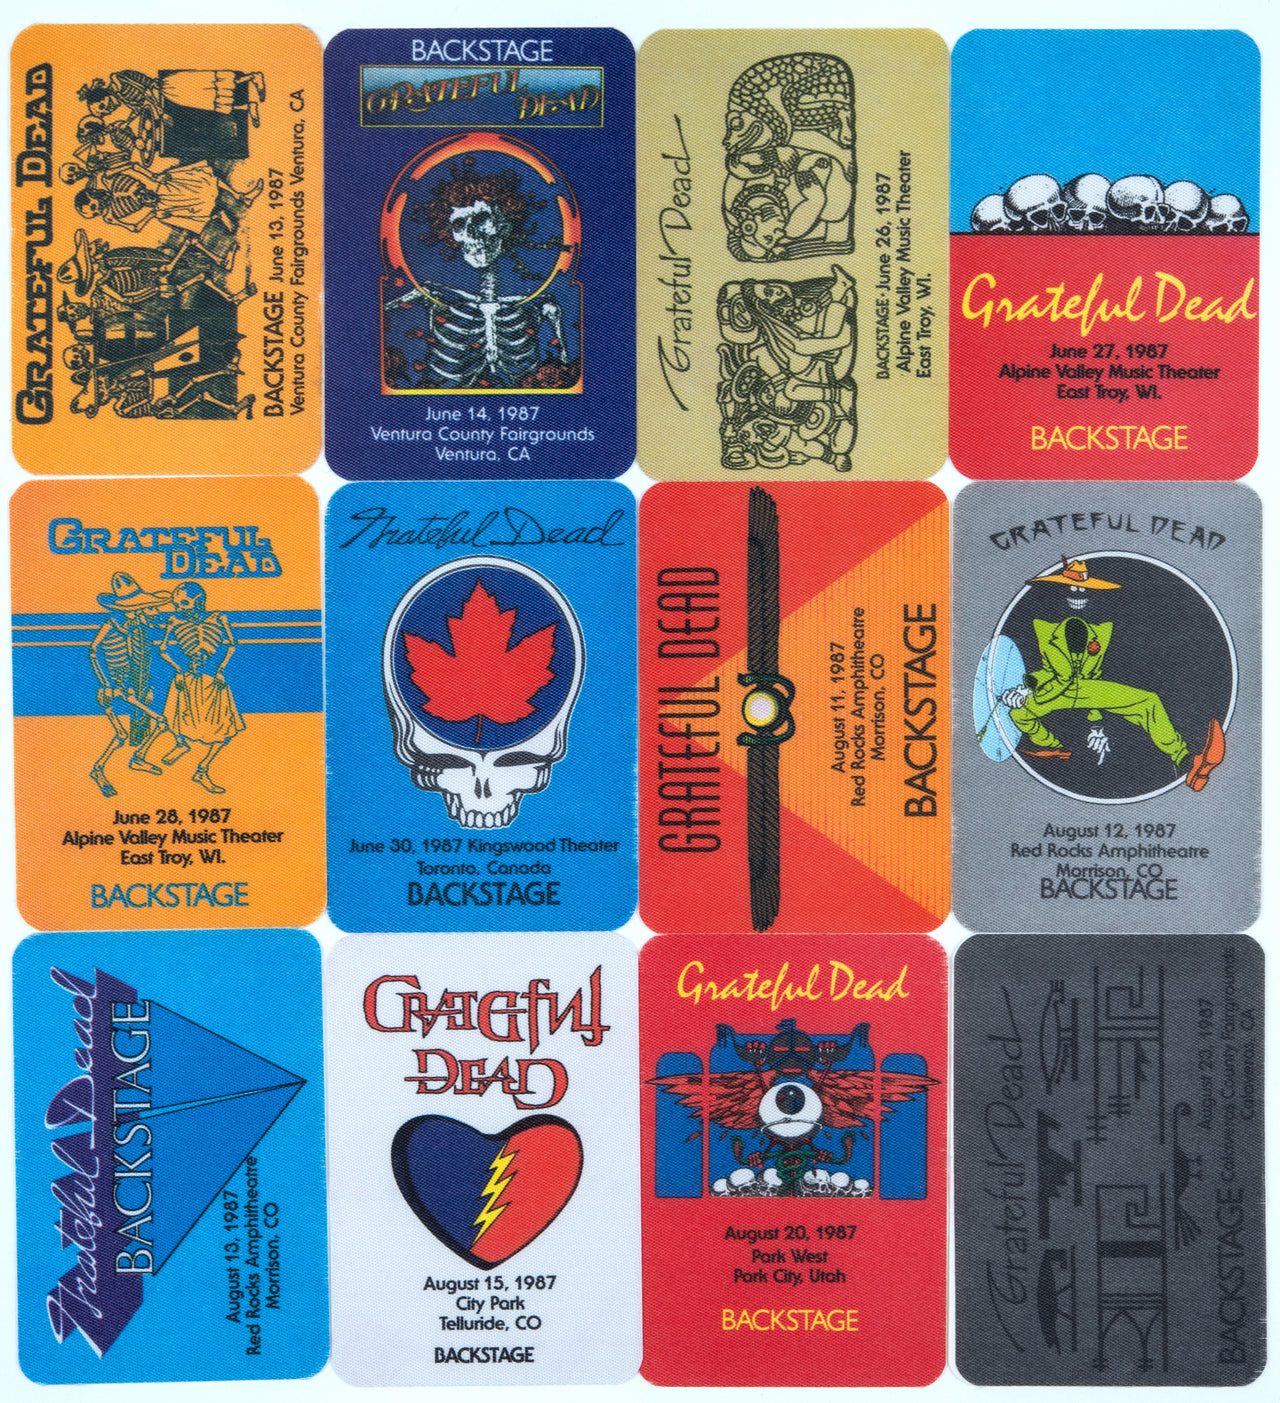 Grateful Dead Backstage Passes (6/13/1987 - 8/23/1987) from Dan Healy